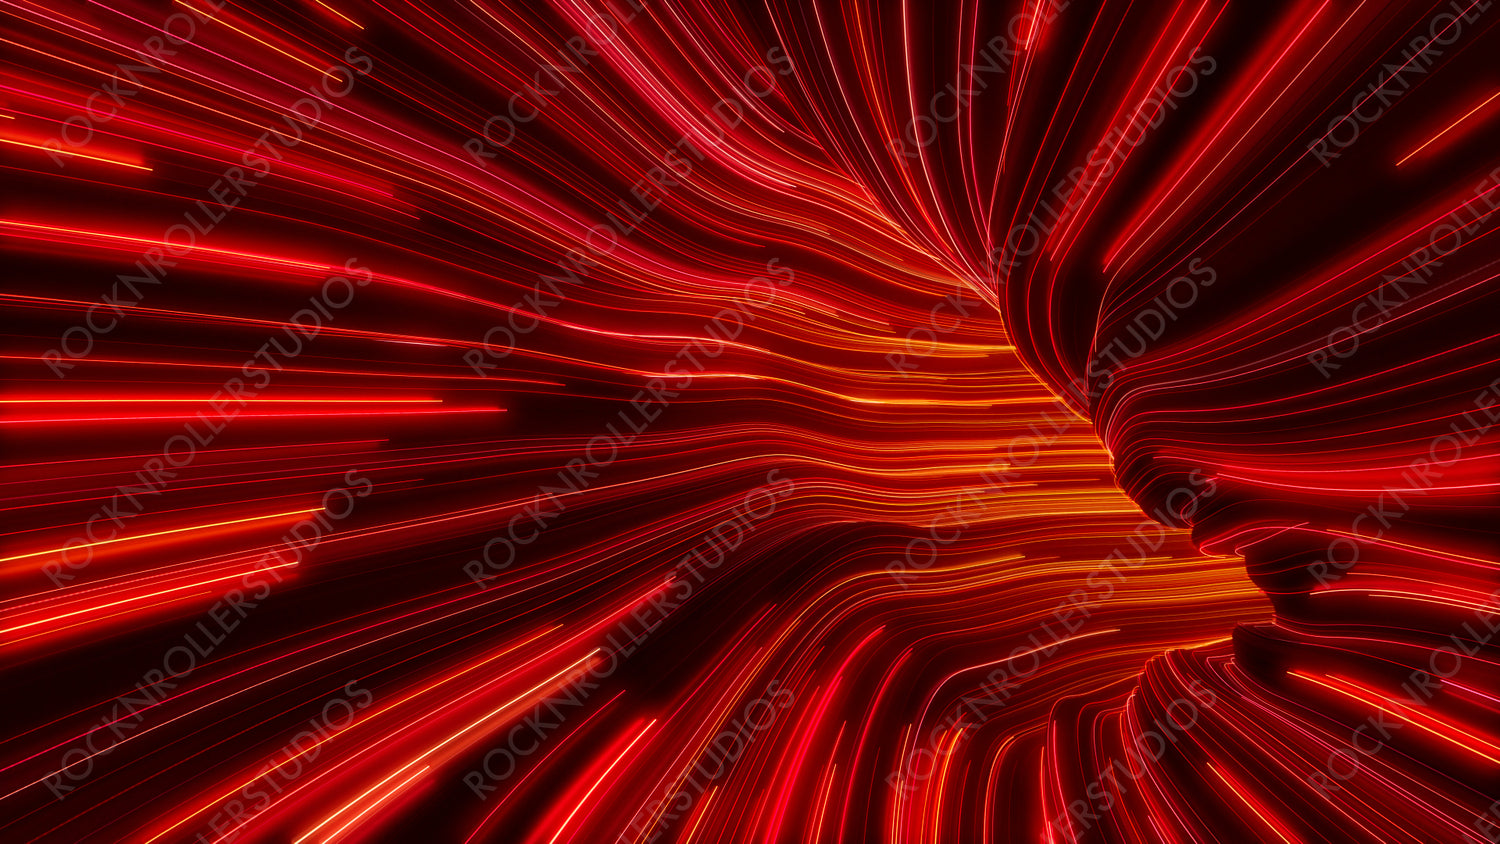 Red, Orange and White Colored Swirls form Colorful Neon Lights Tunnel. 3D Render.